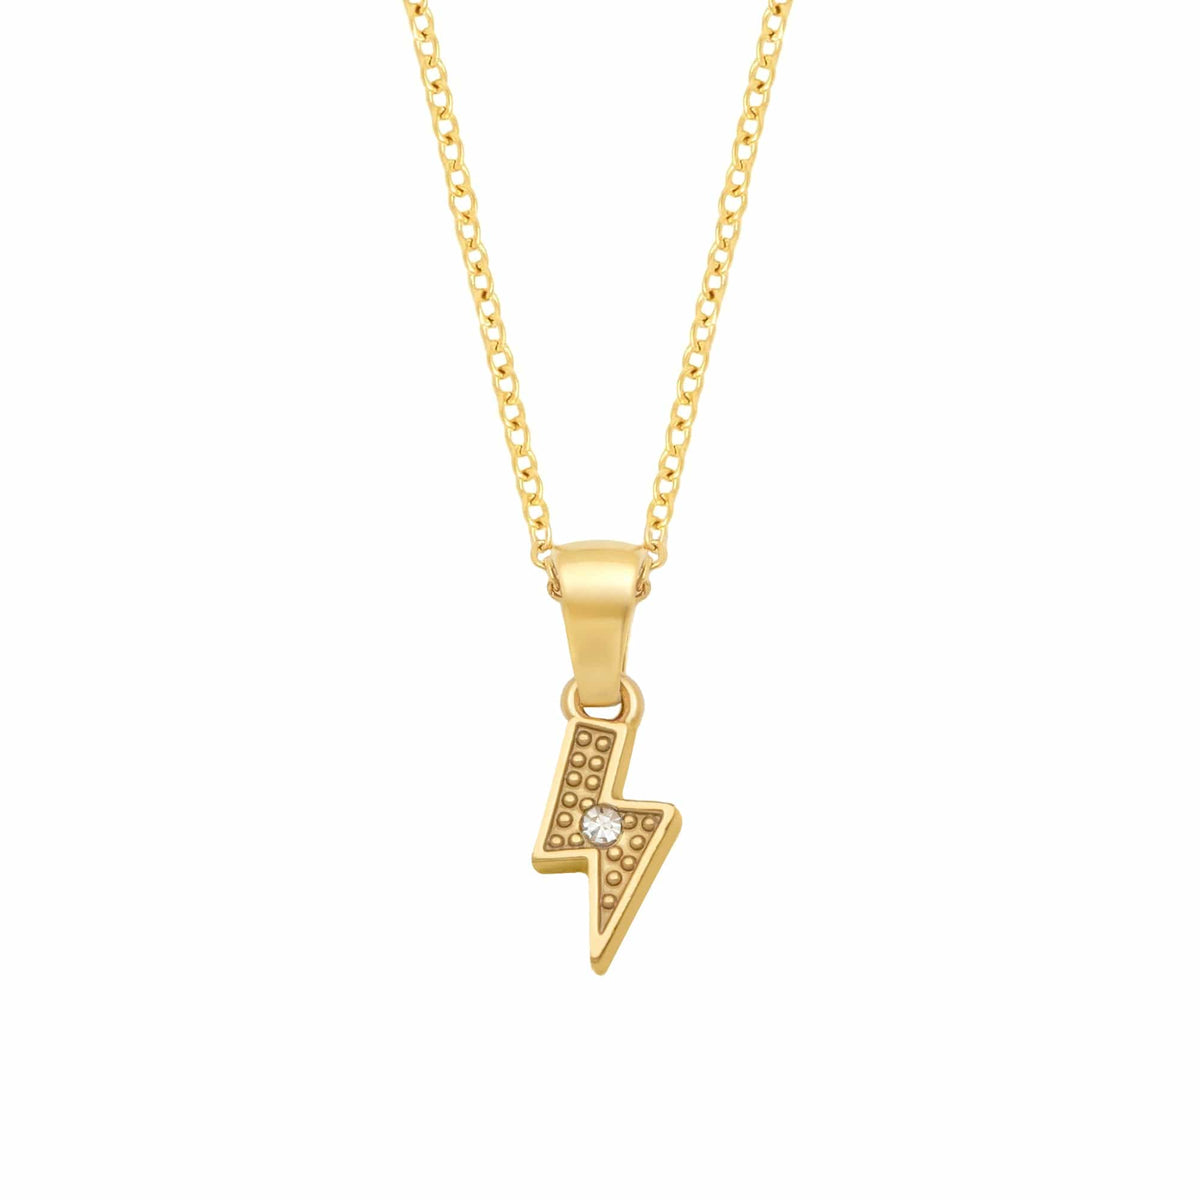 BohoMoon Stainless Steel Flash Necklace Gold